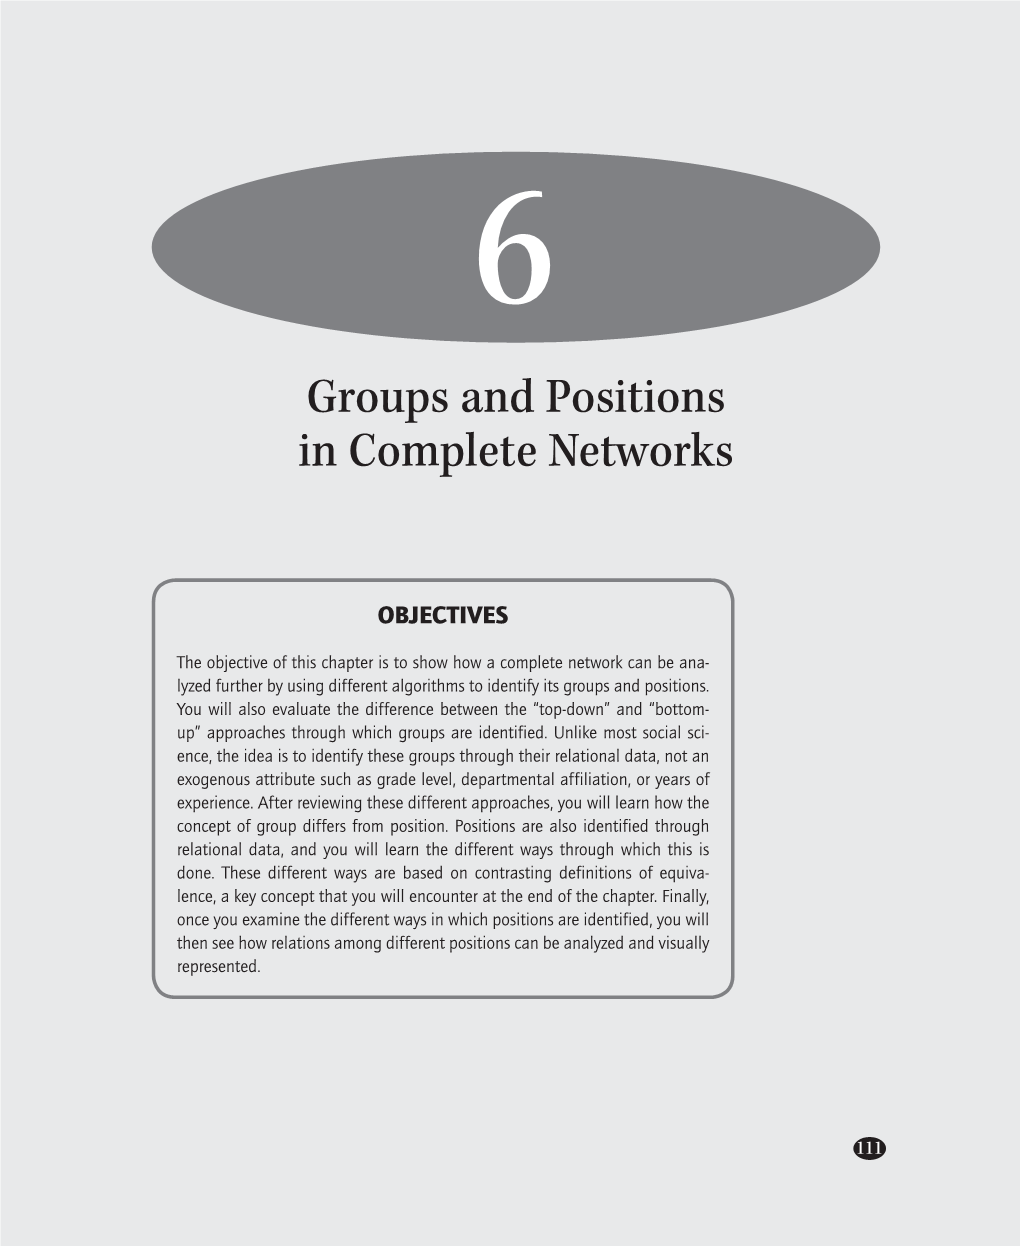 Groups and Positions in Complete Networks